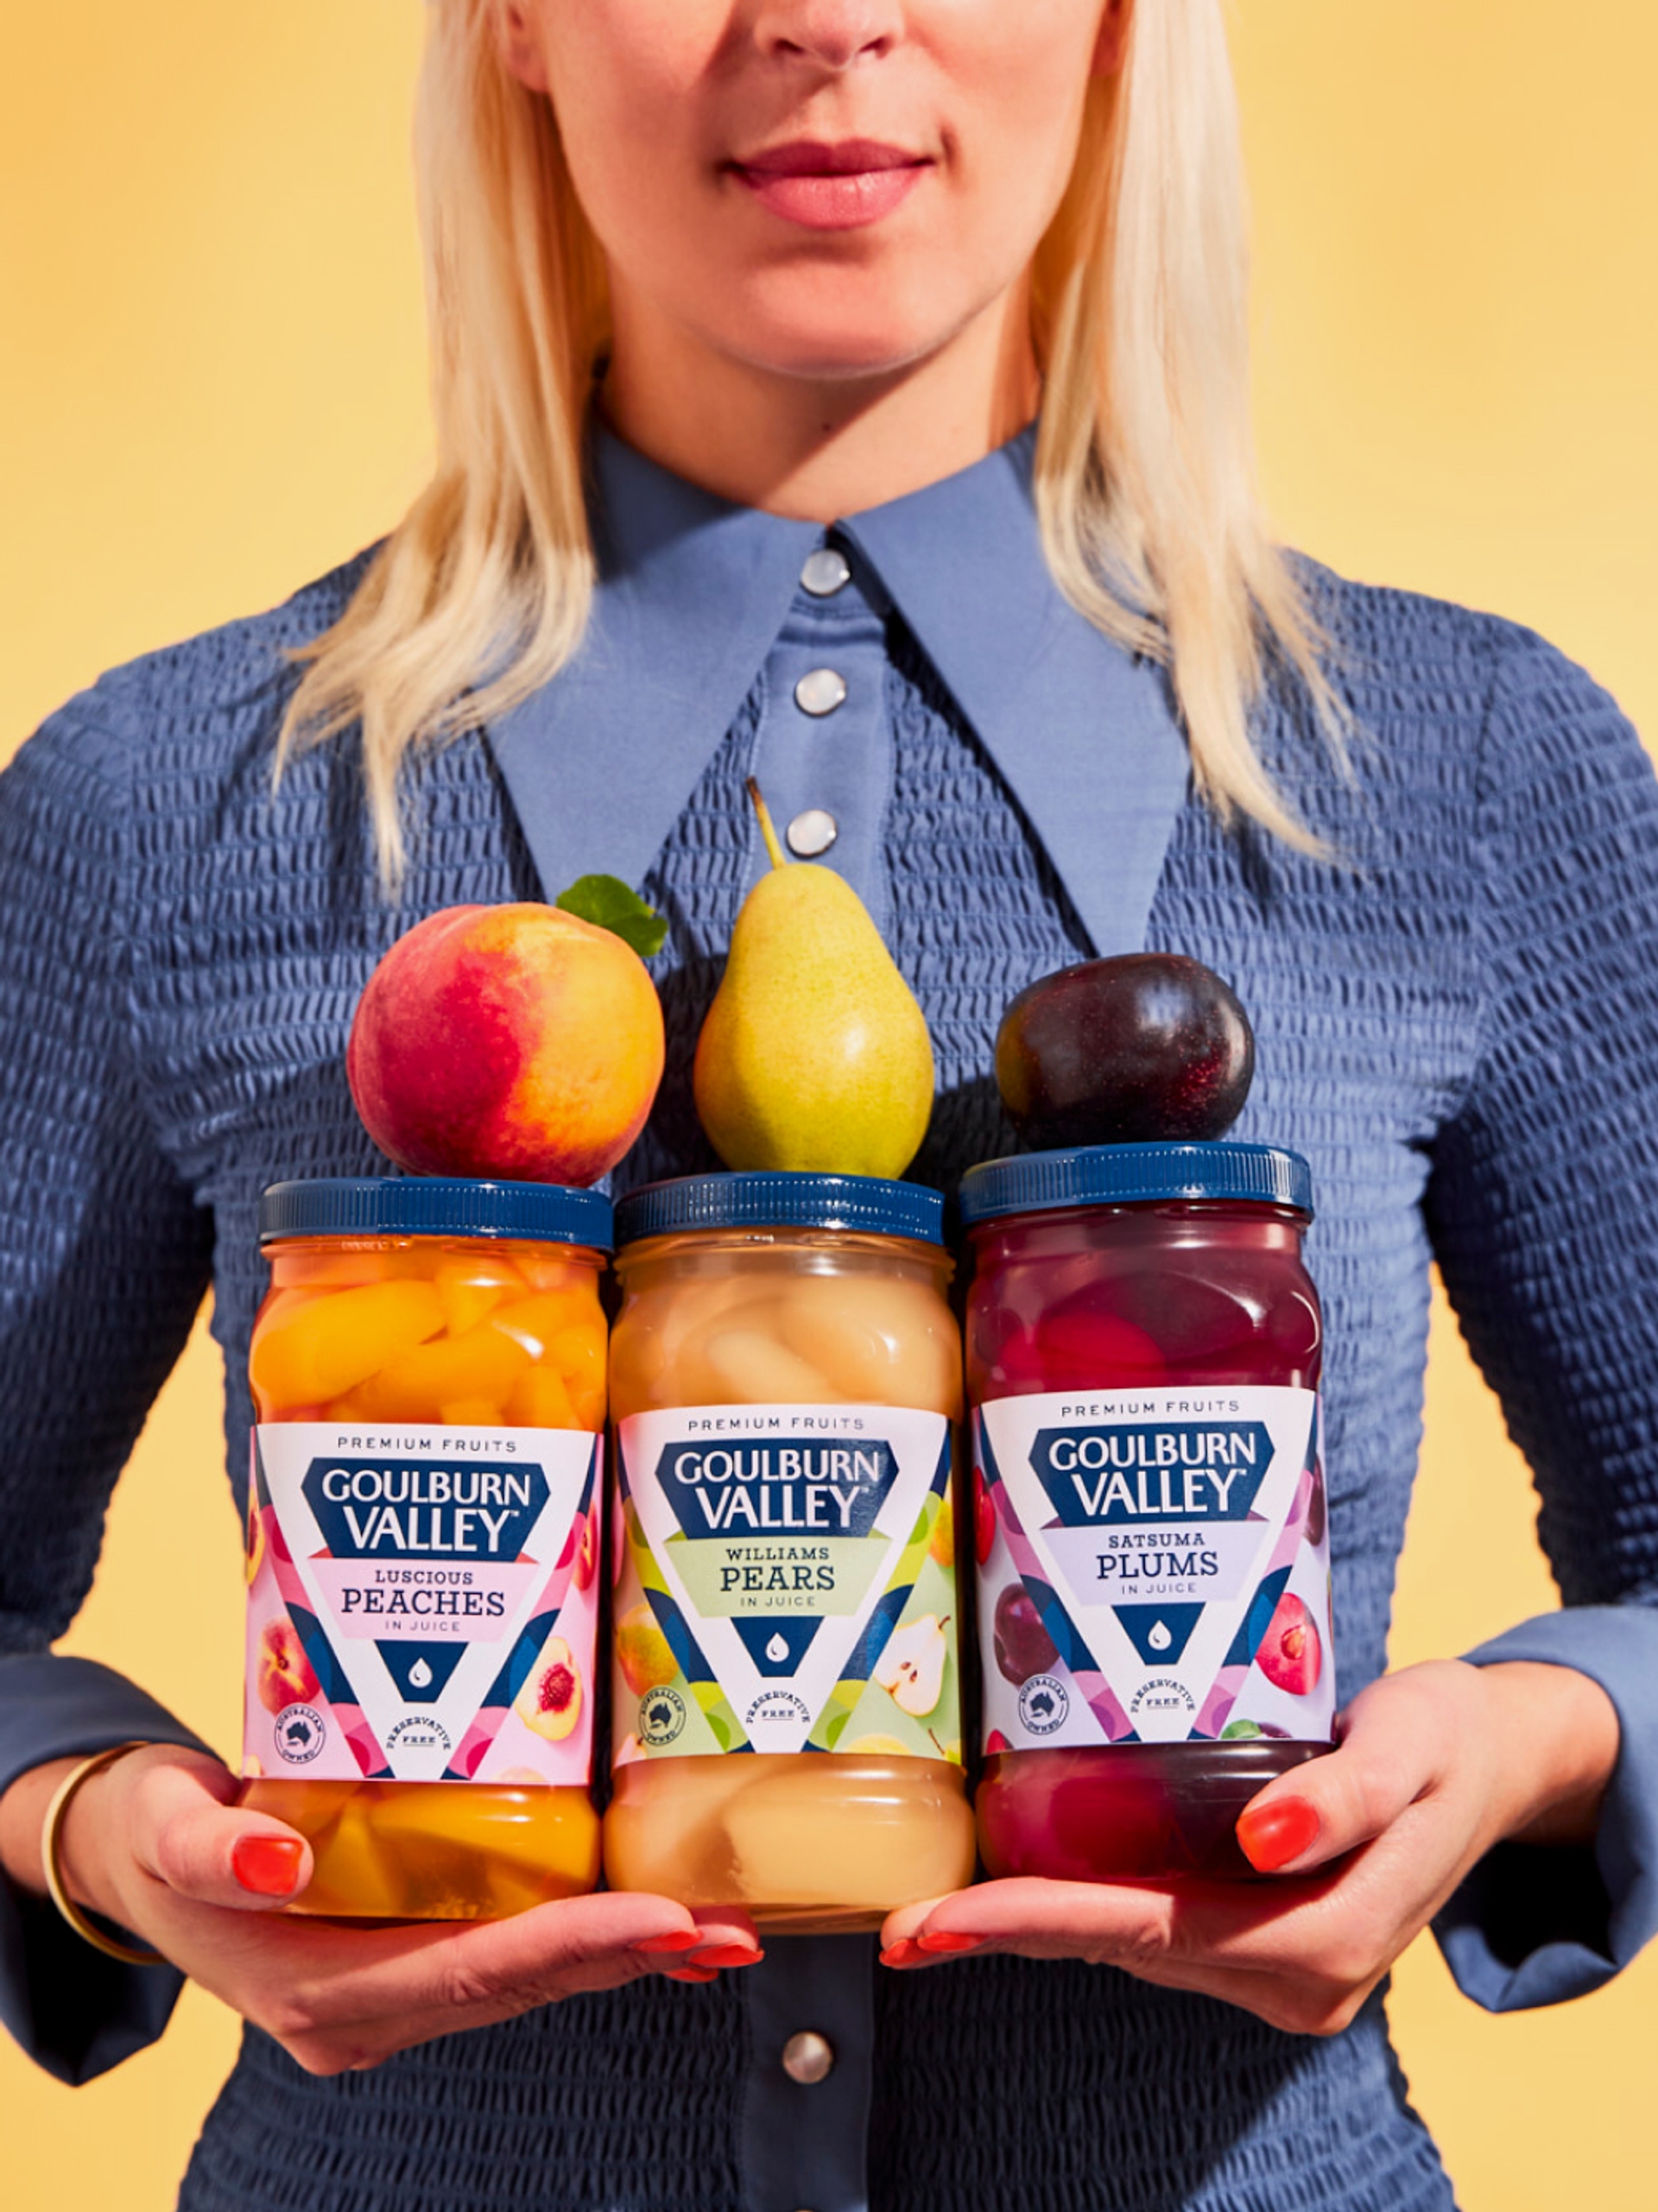 Woman holding packaging design of Goulburn Valley fruit brand designed by consumer brand agency Our Revolution in Sydney and London Jen Doran